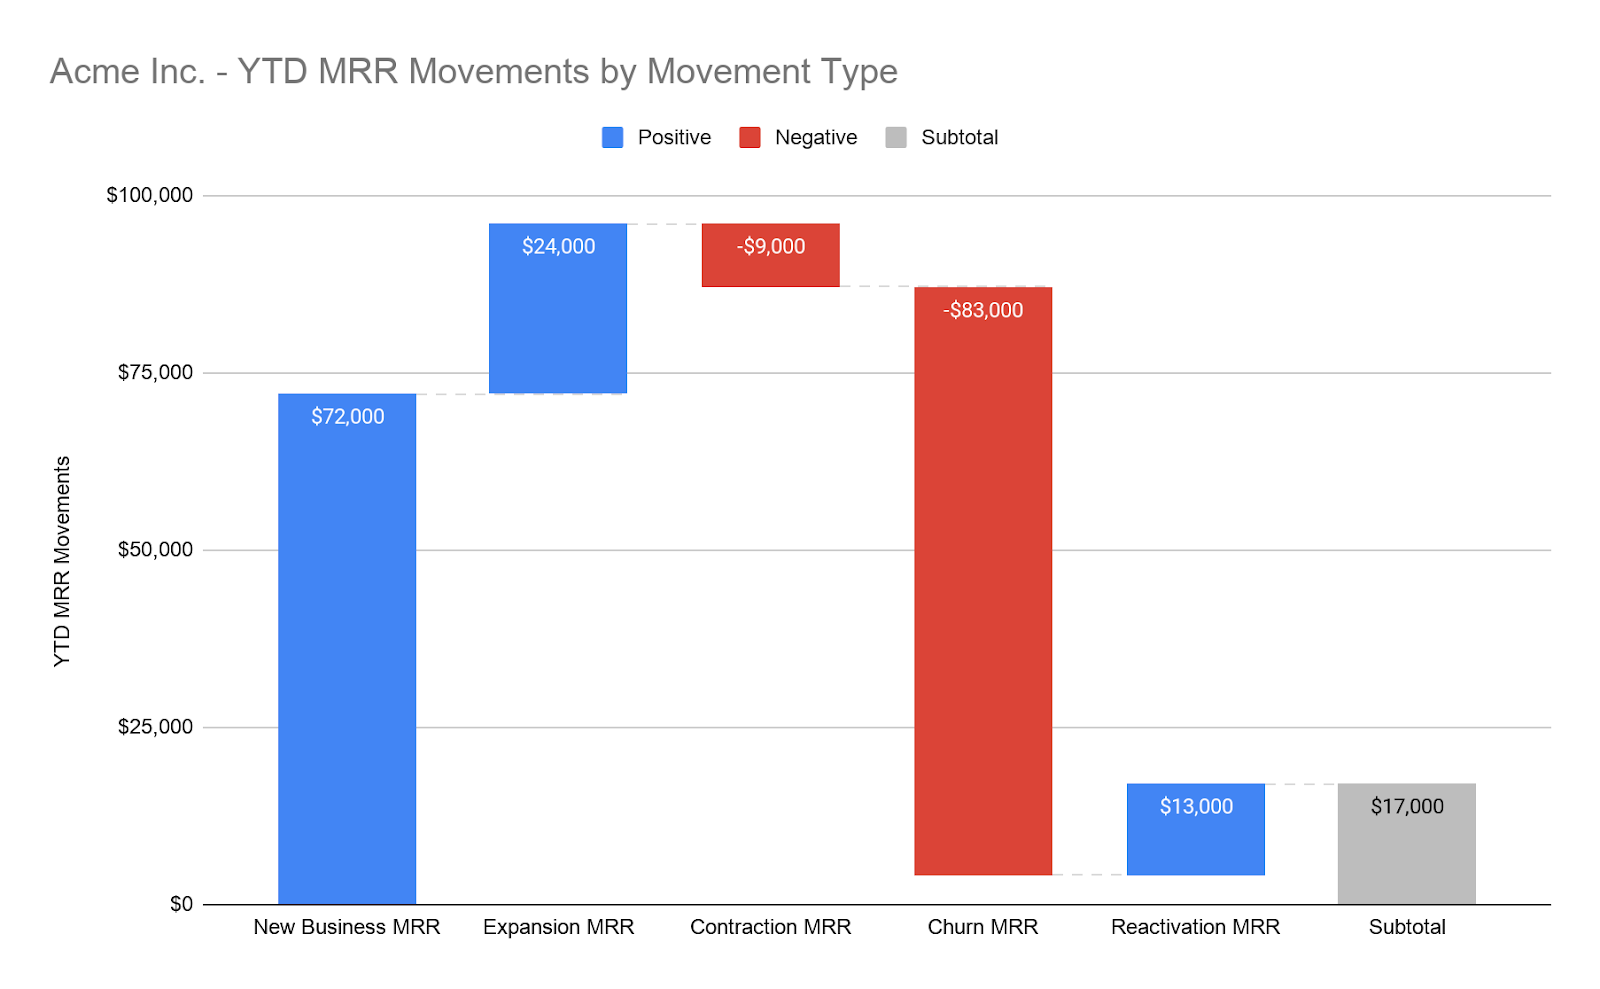 A waterfall chart allows you to visualize the impact of Expansion and Reactivation MRR